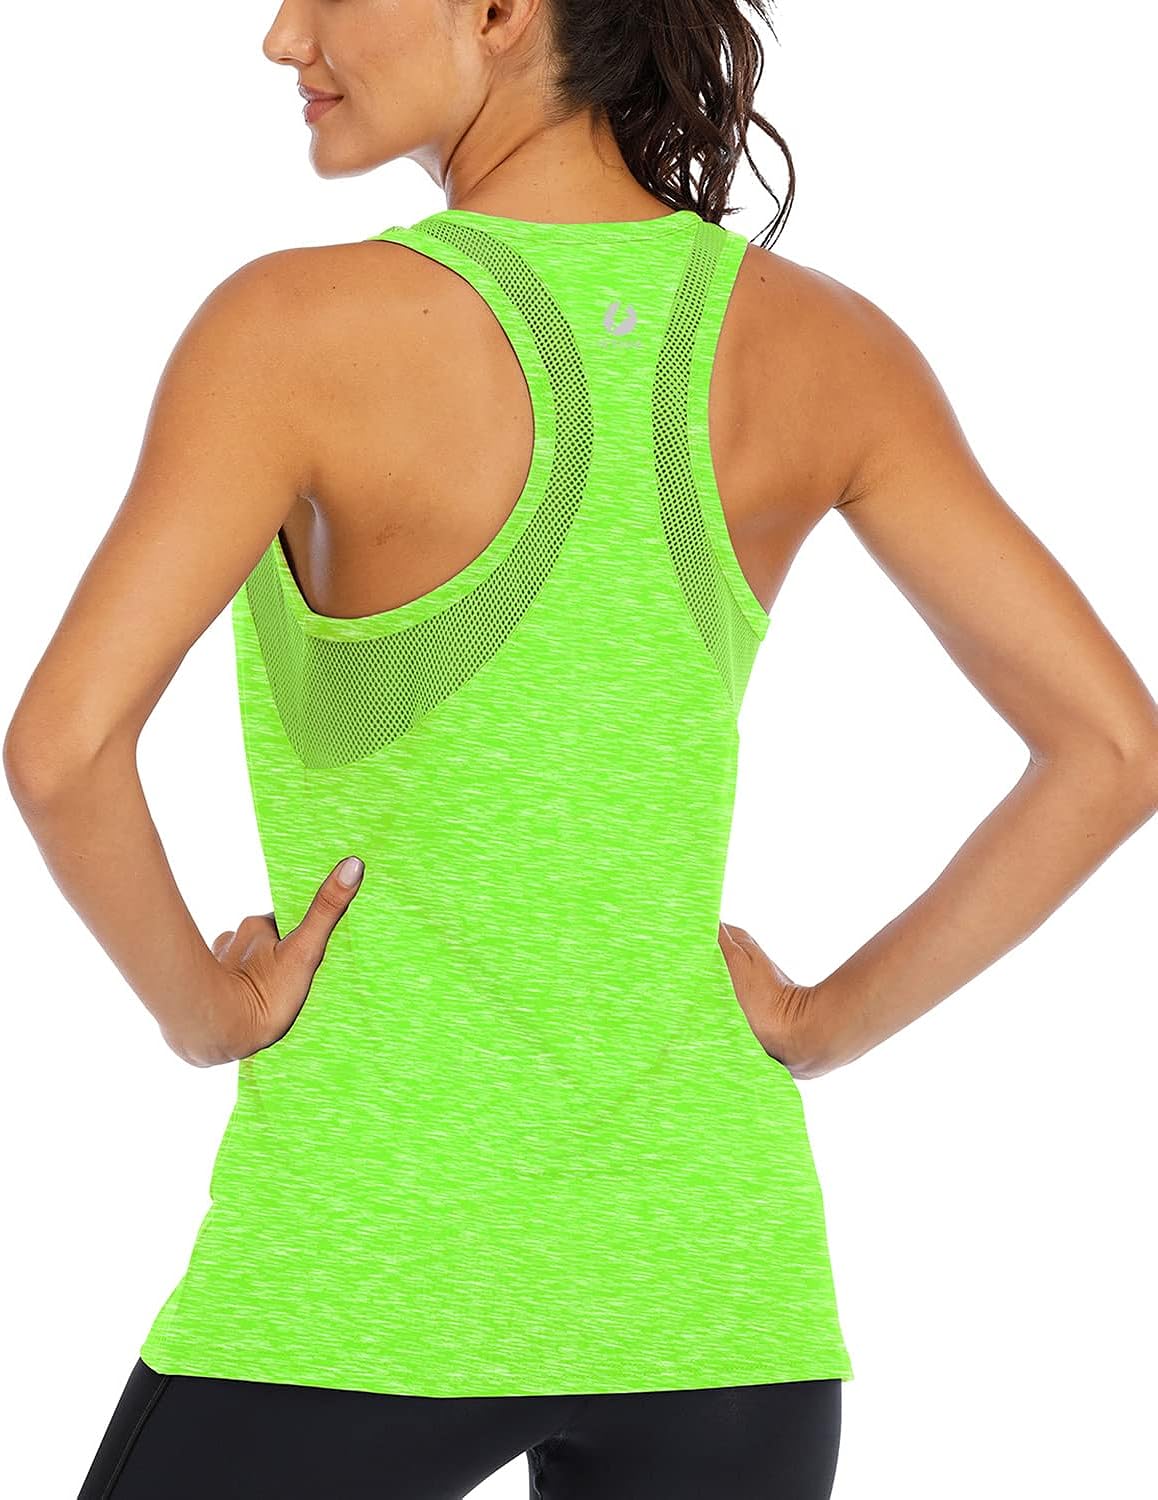 ICTIVE Workout Tank Tops Review